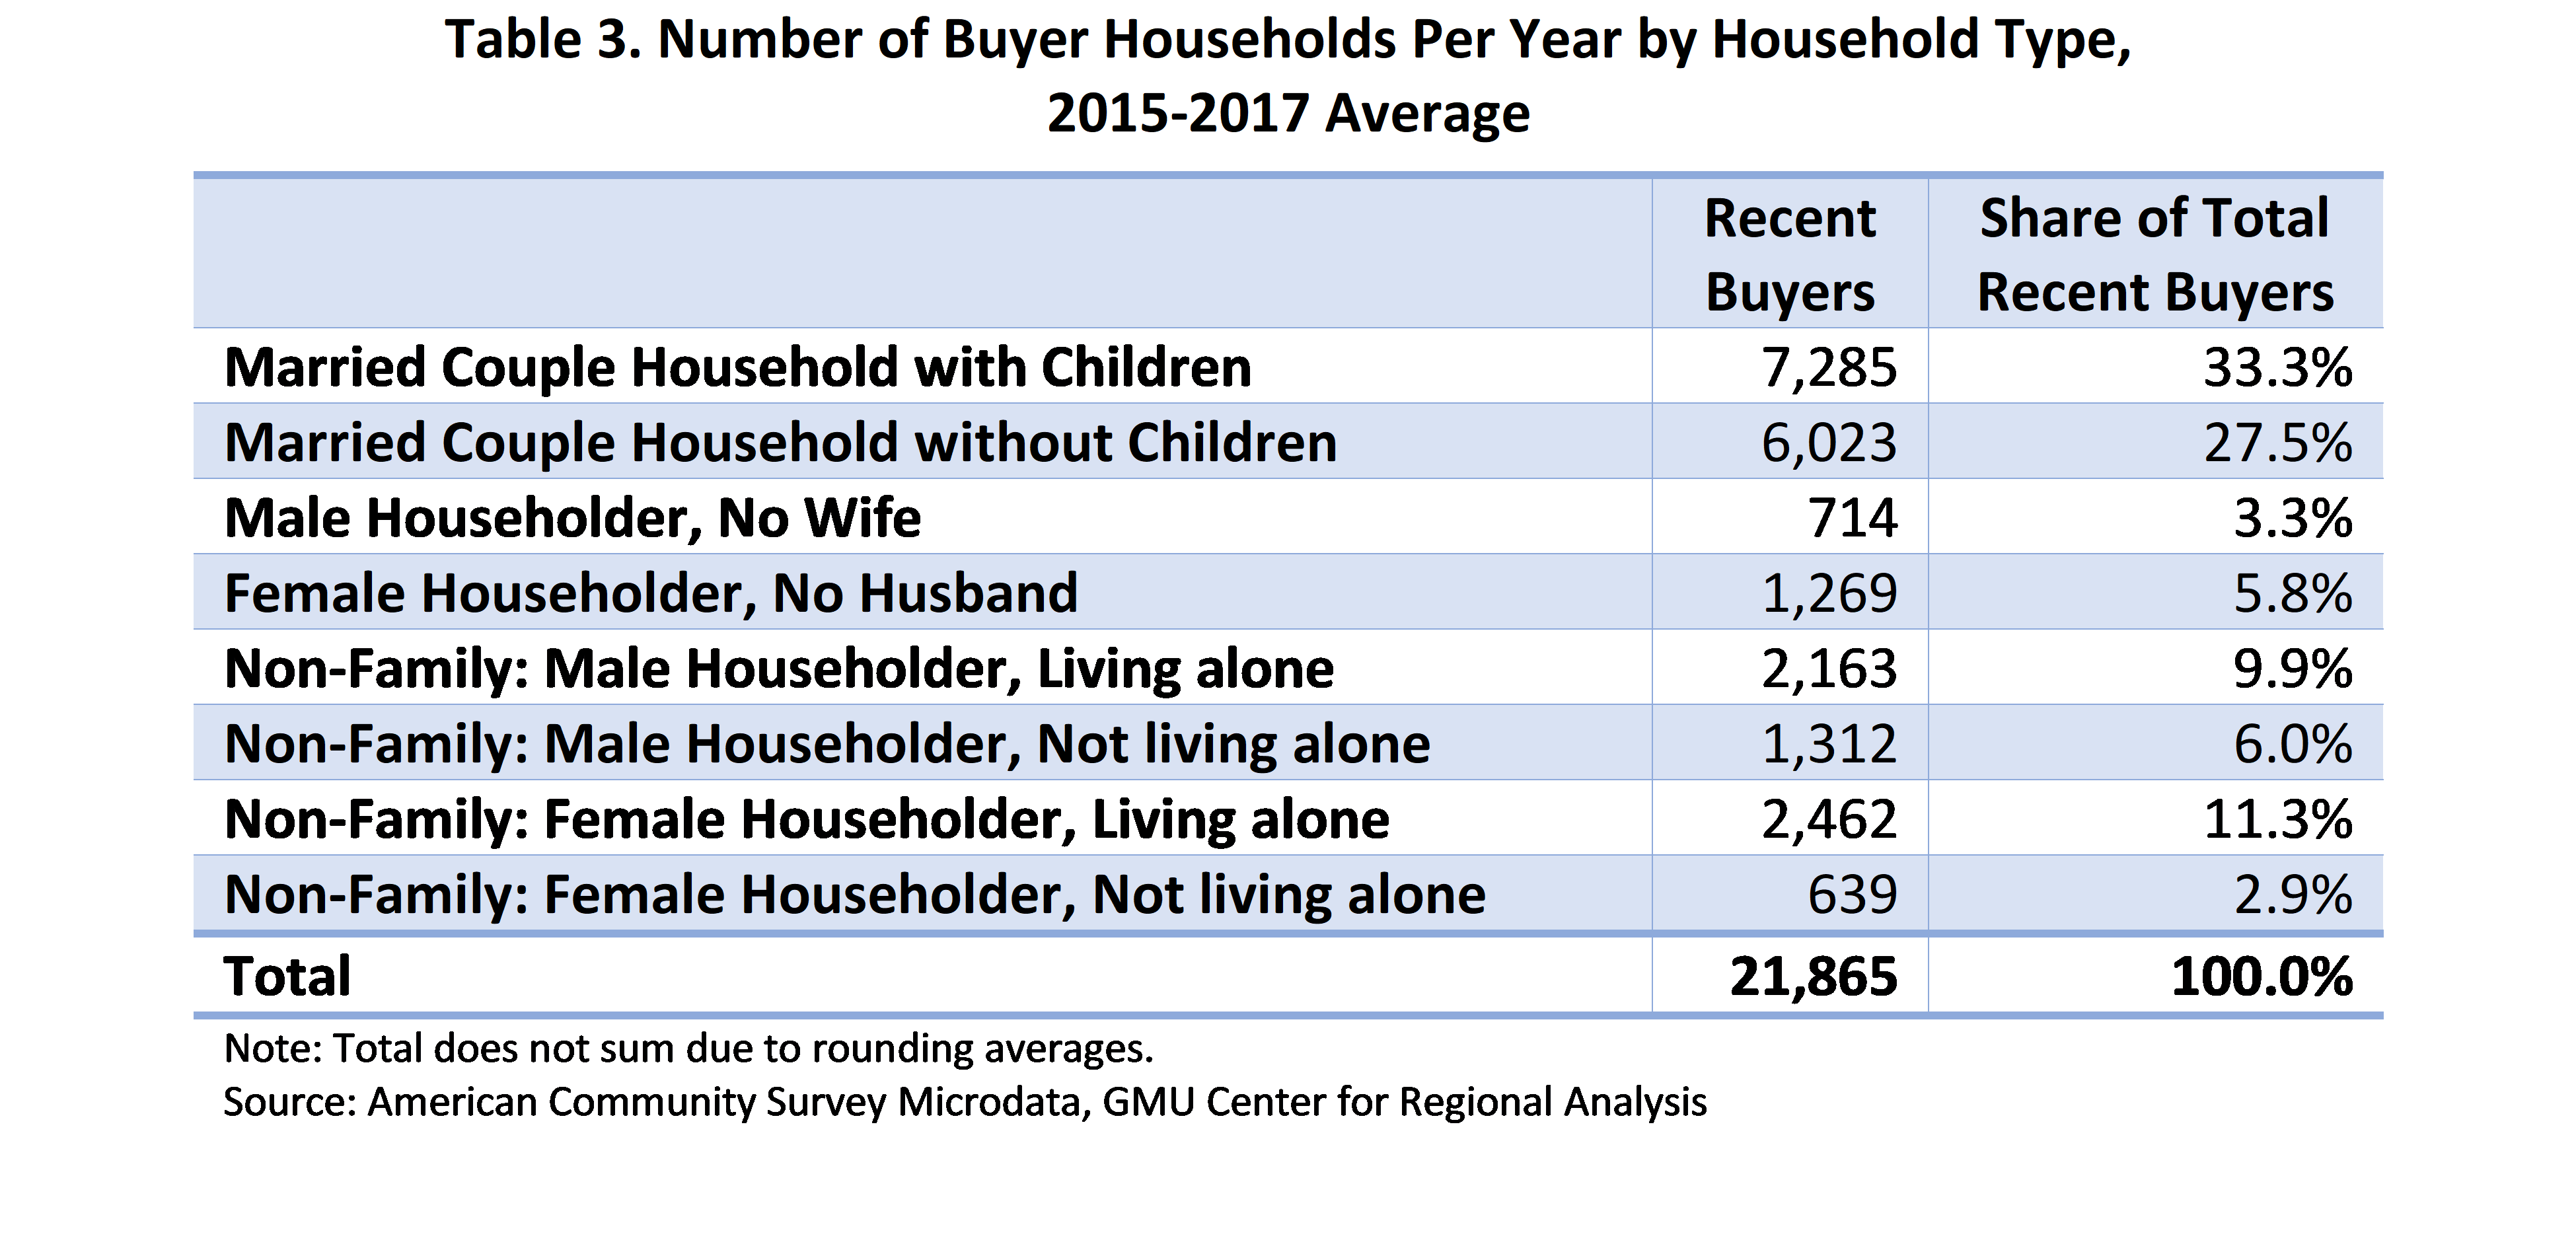 Table 3. Number of Buyer Households Per Year by Household